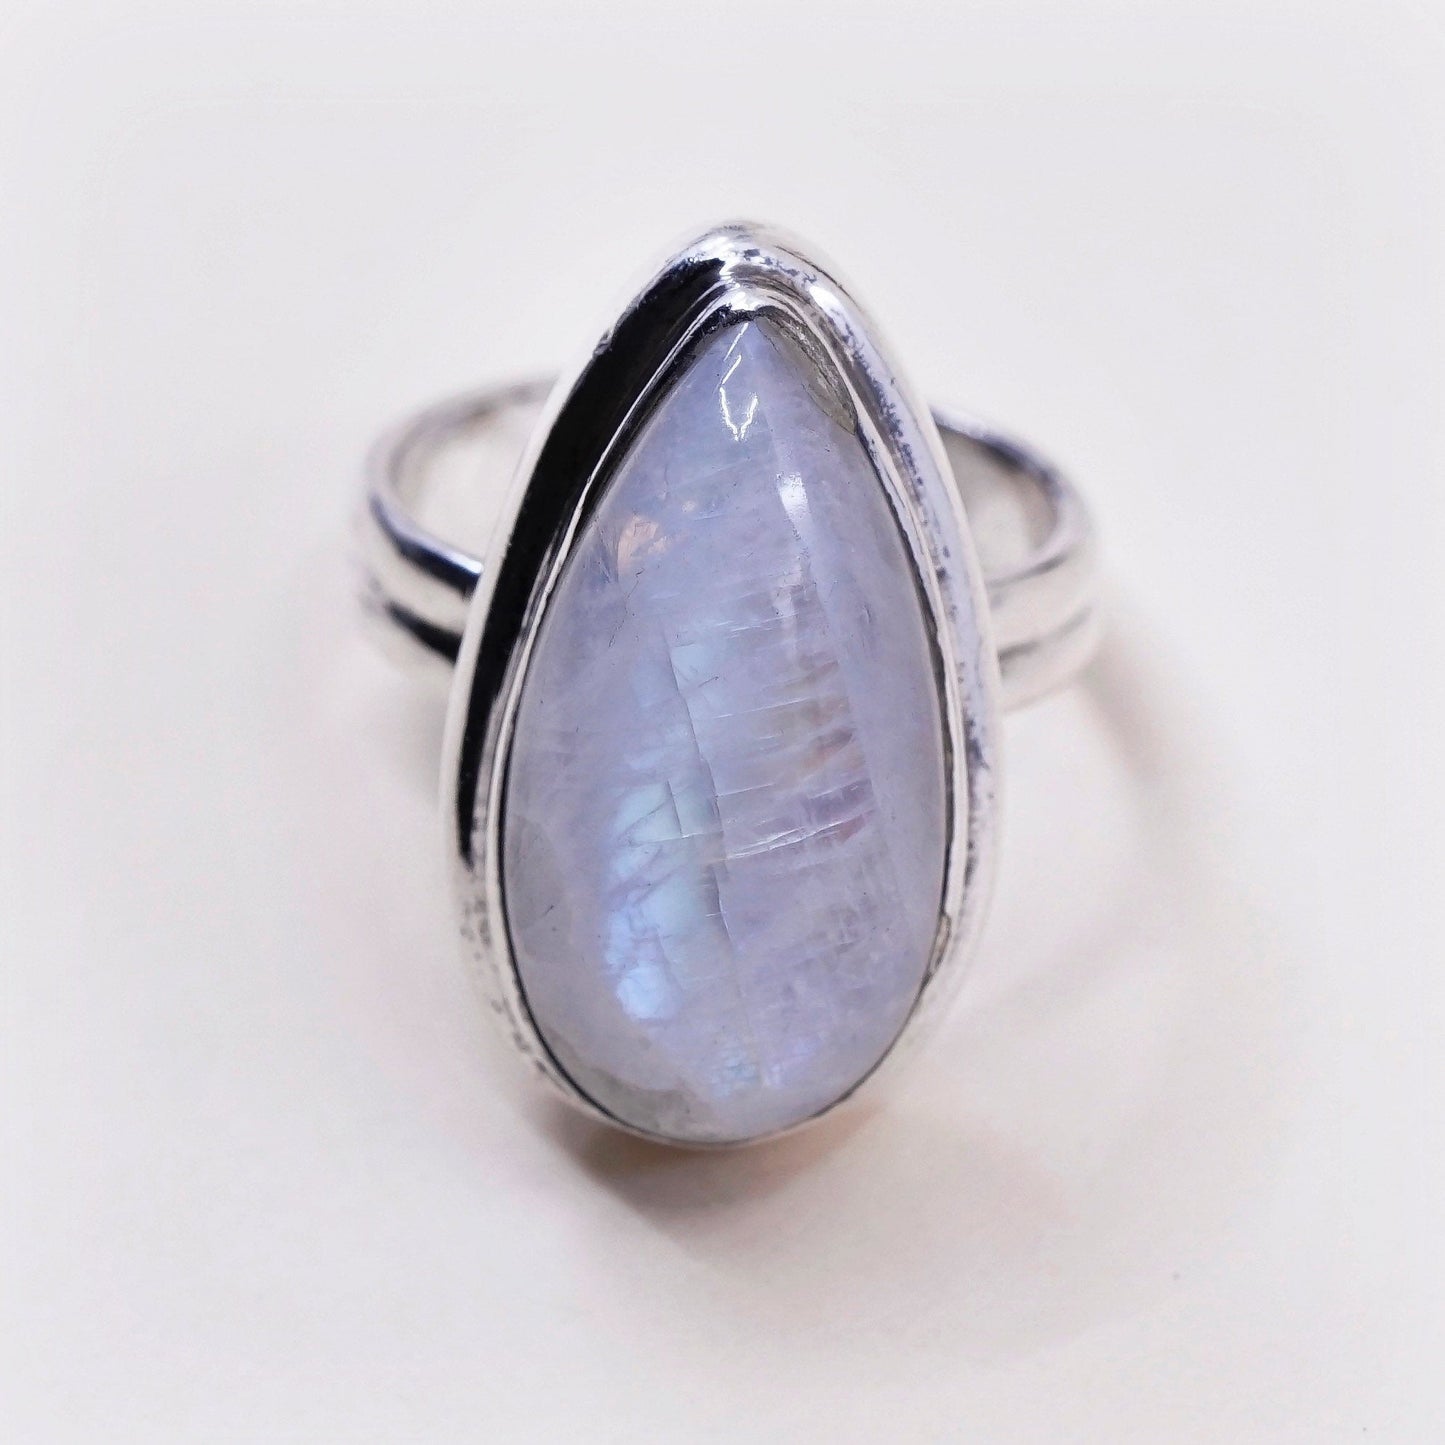 Size 9, vtg sterling silver handmade ring, 925 band with teardrop moonstone